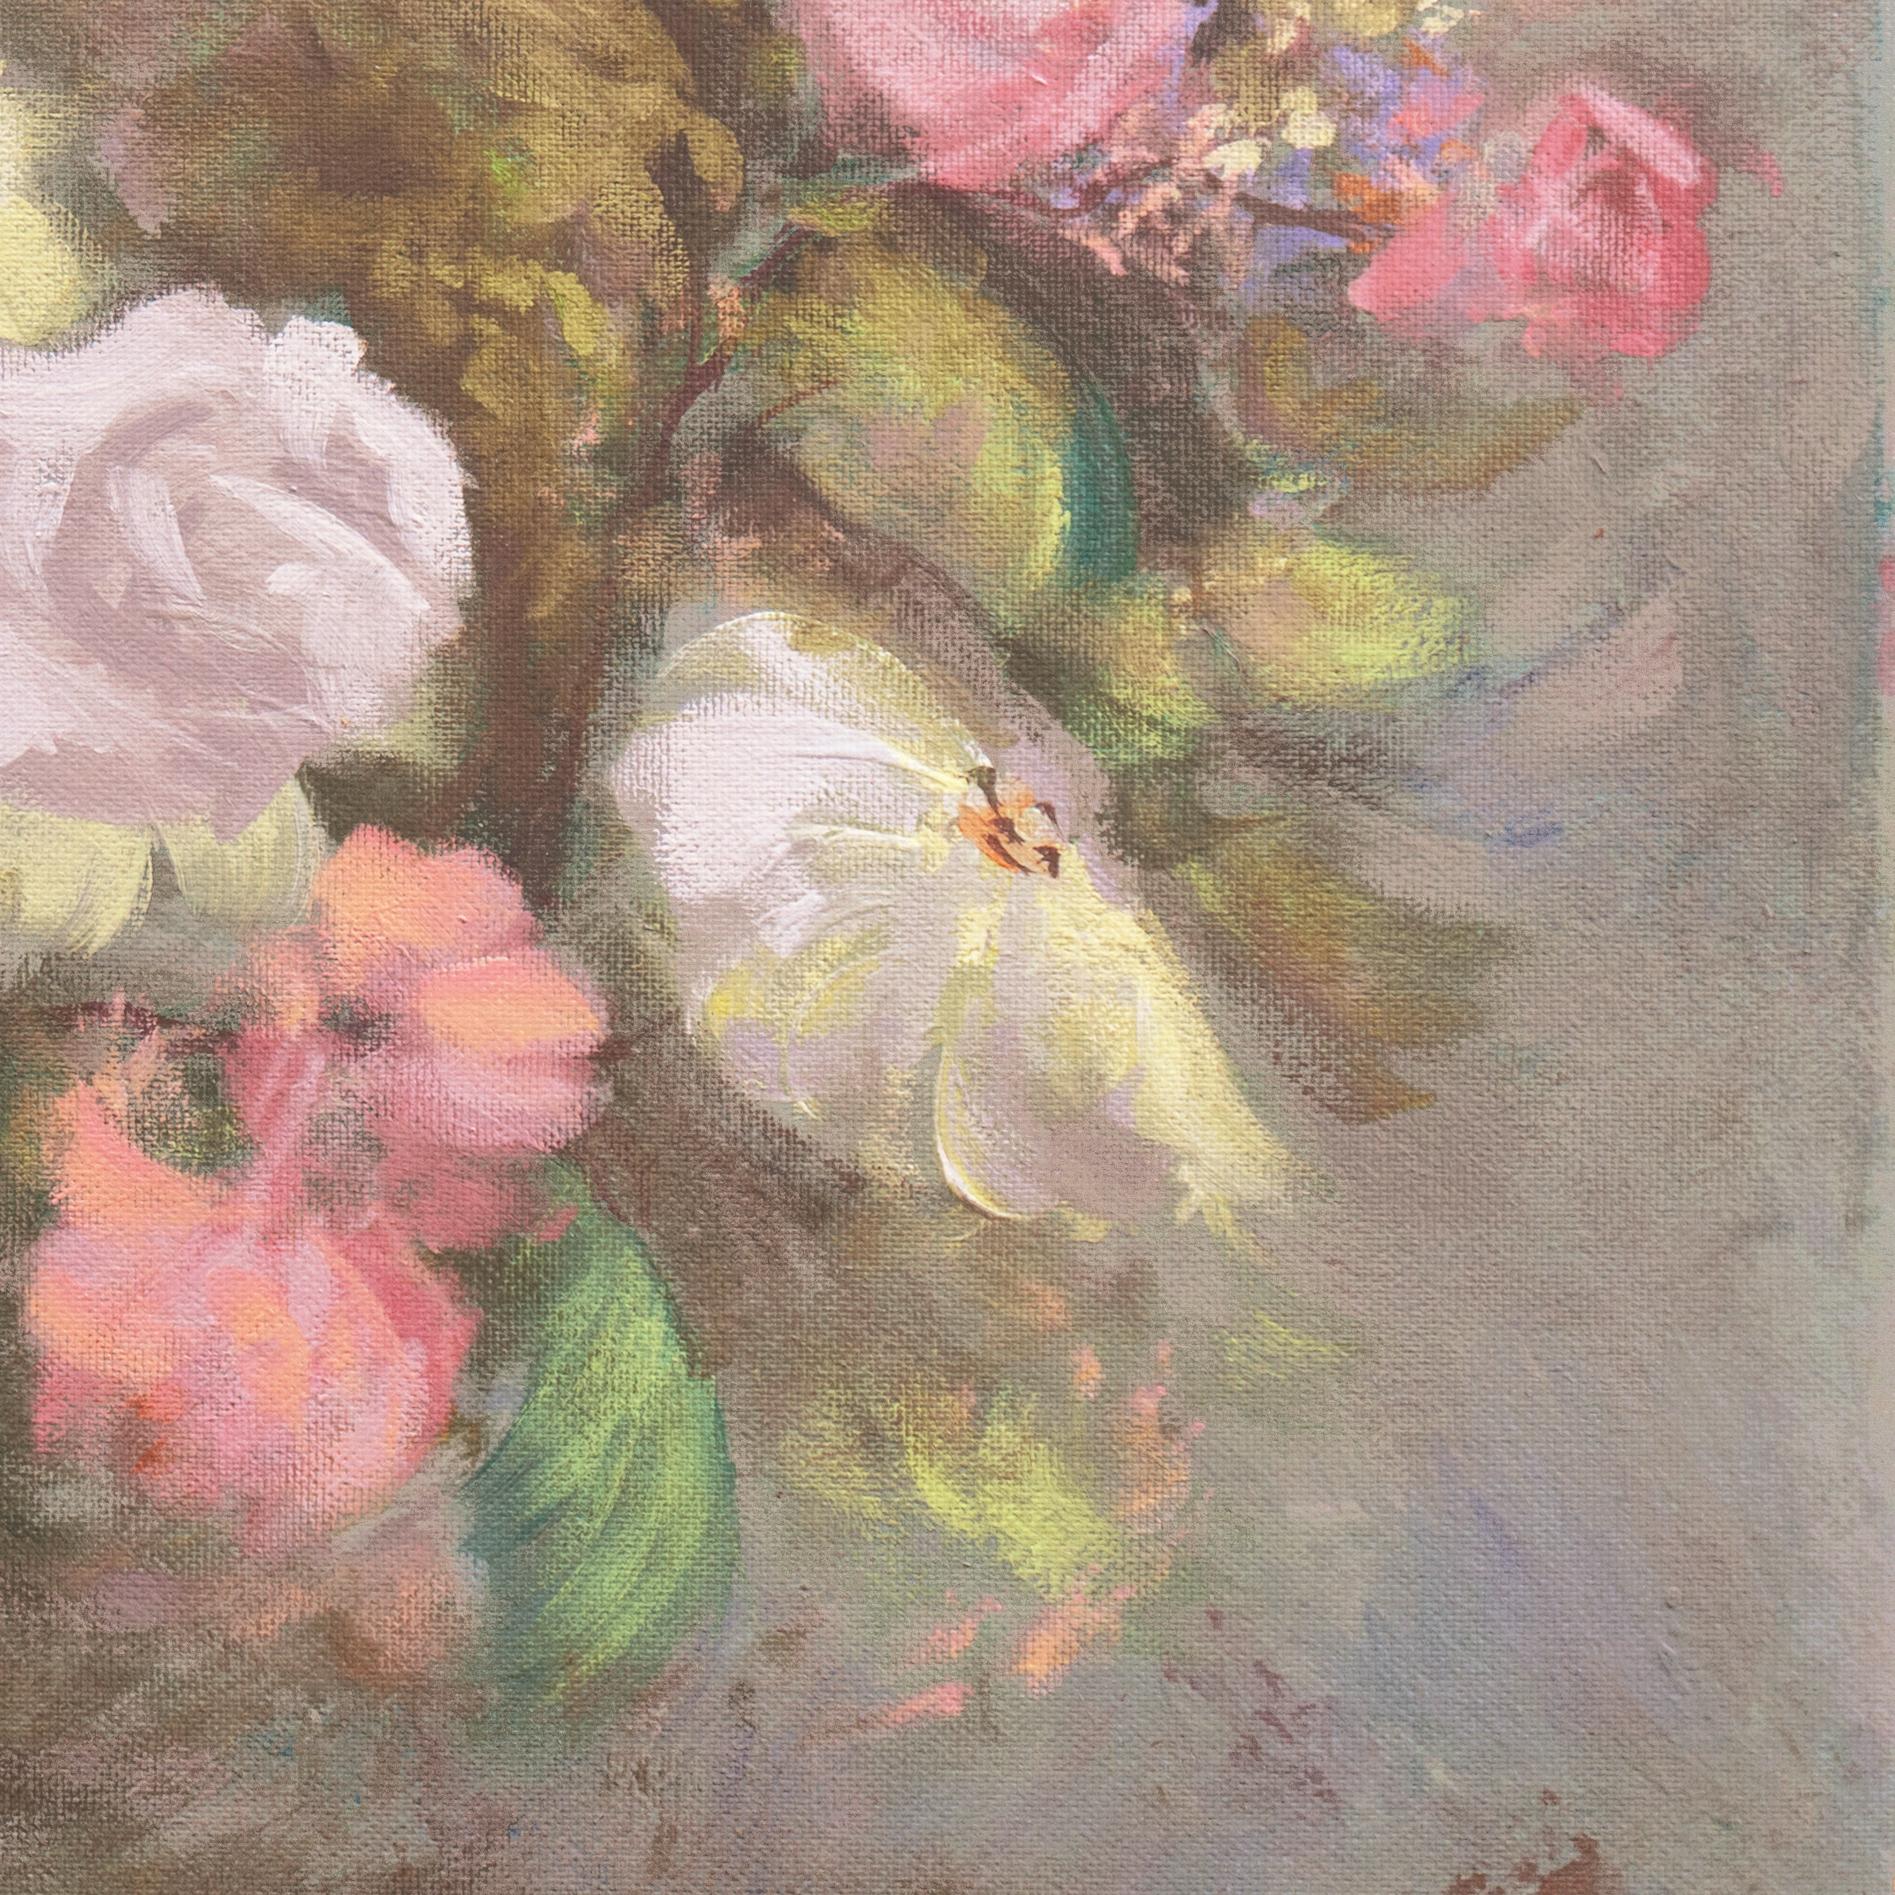 'Still Life of Flowers, Parchment and Rose', Huntington Beach Art League, Hawaii - Impressionist Painting by H. Evan Sanders